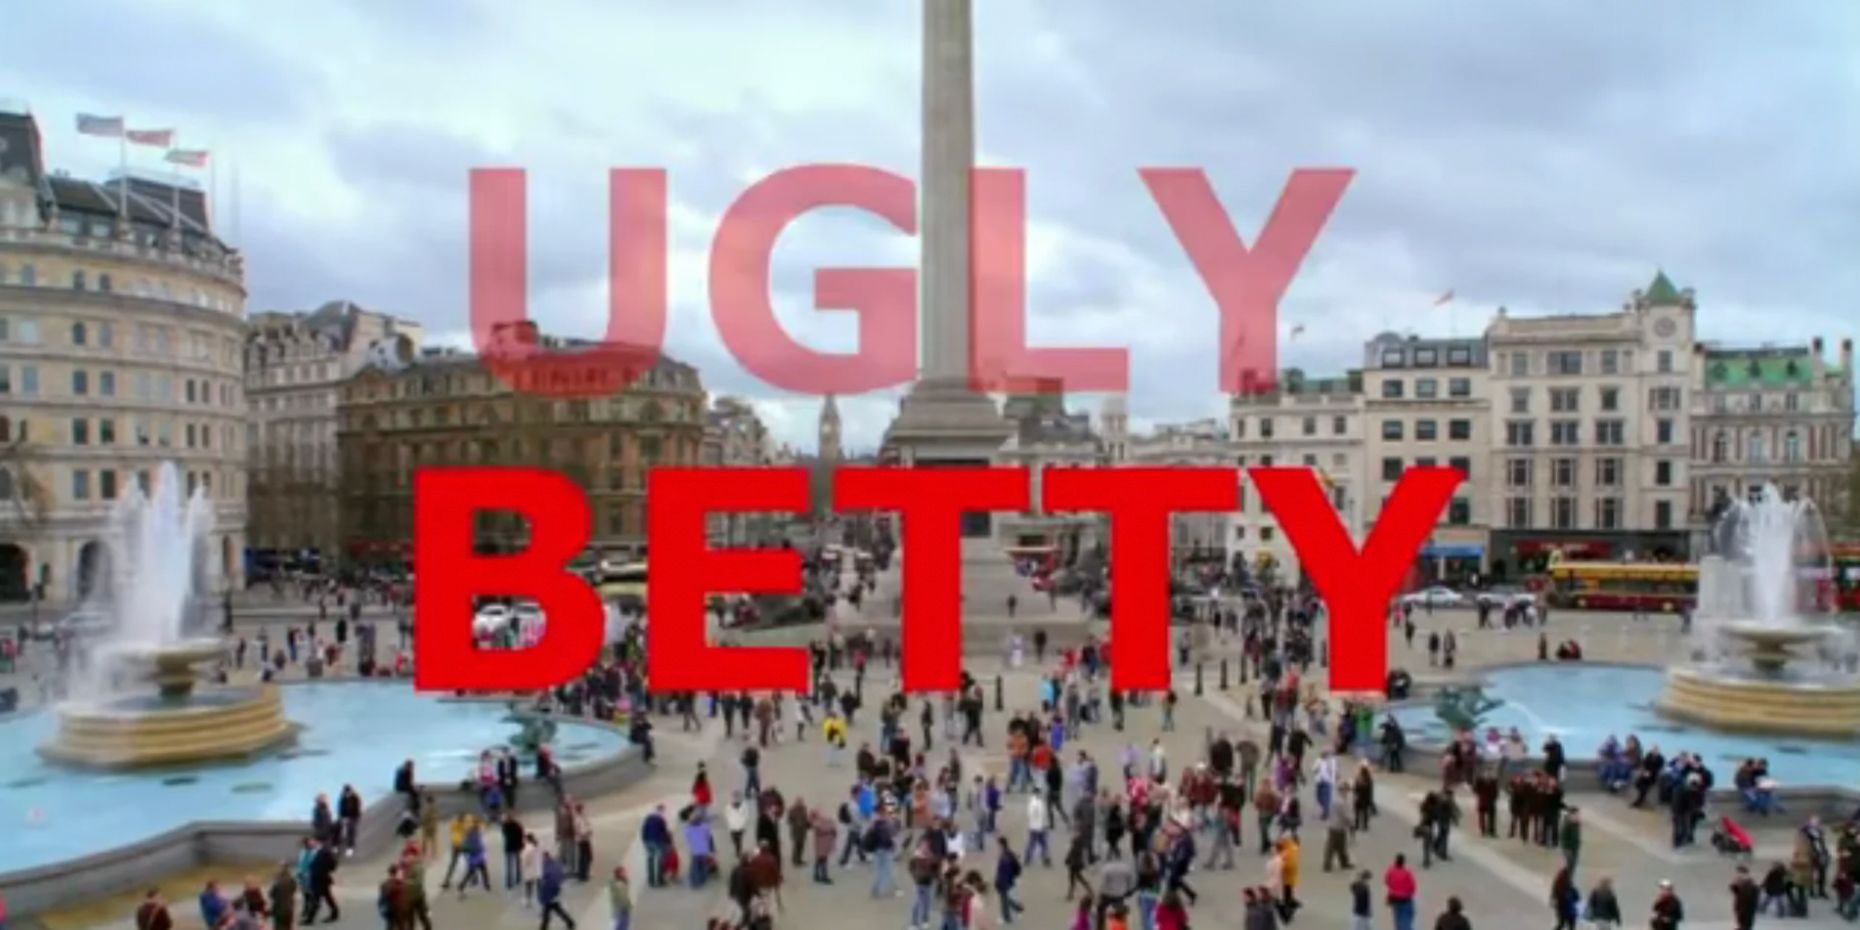 The Ugly fades in the Ugly Betty title card in the final episode of the series